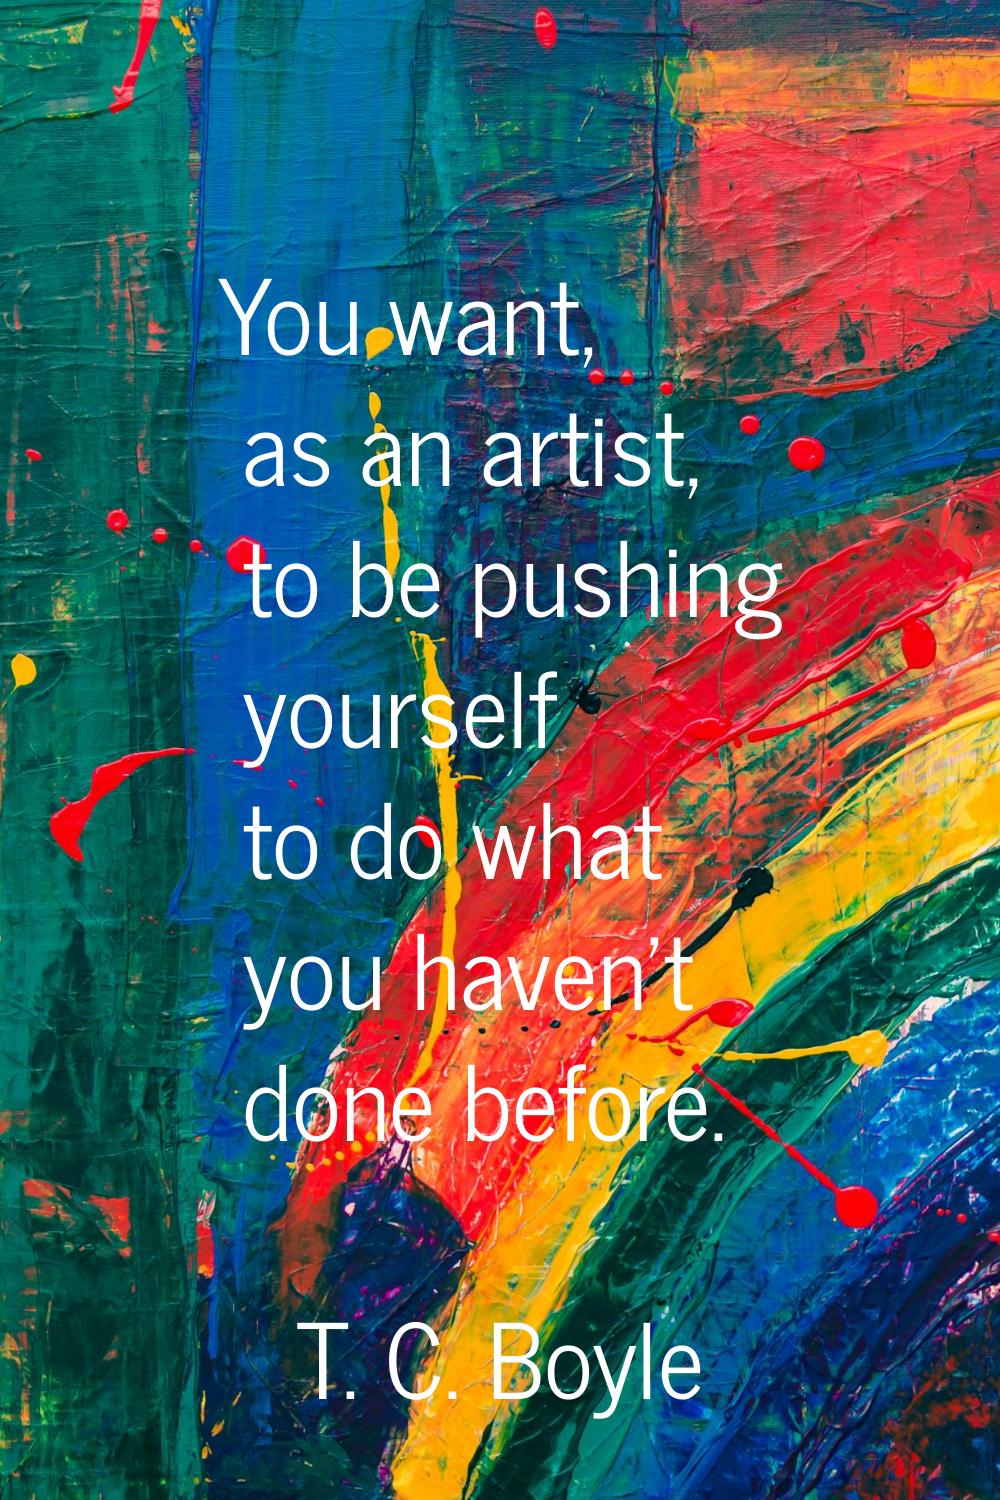 You want, as an artist, to be pushing yourself to do what you haven't done before.